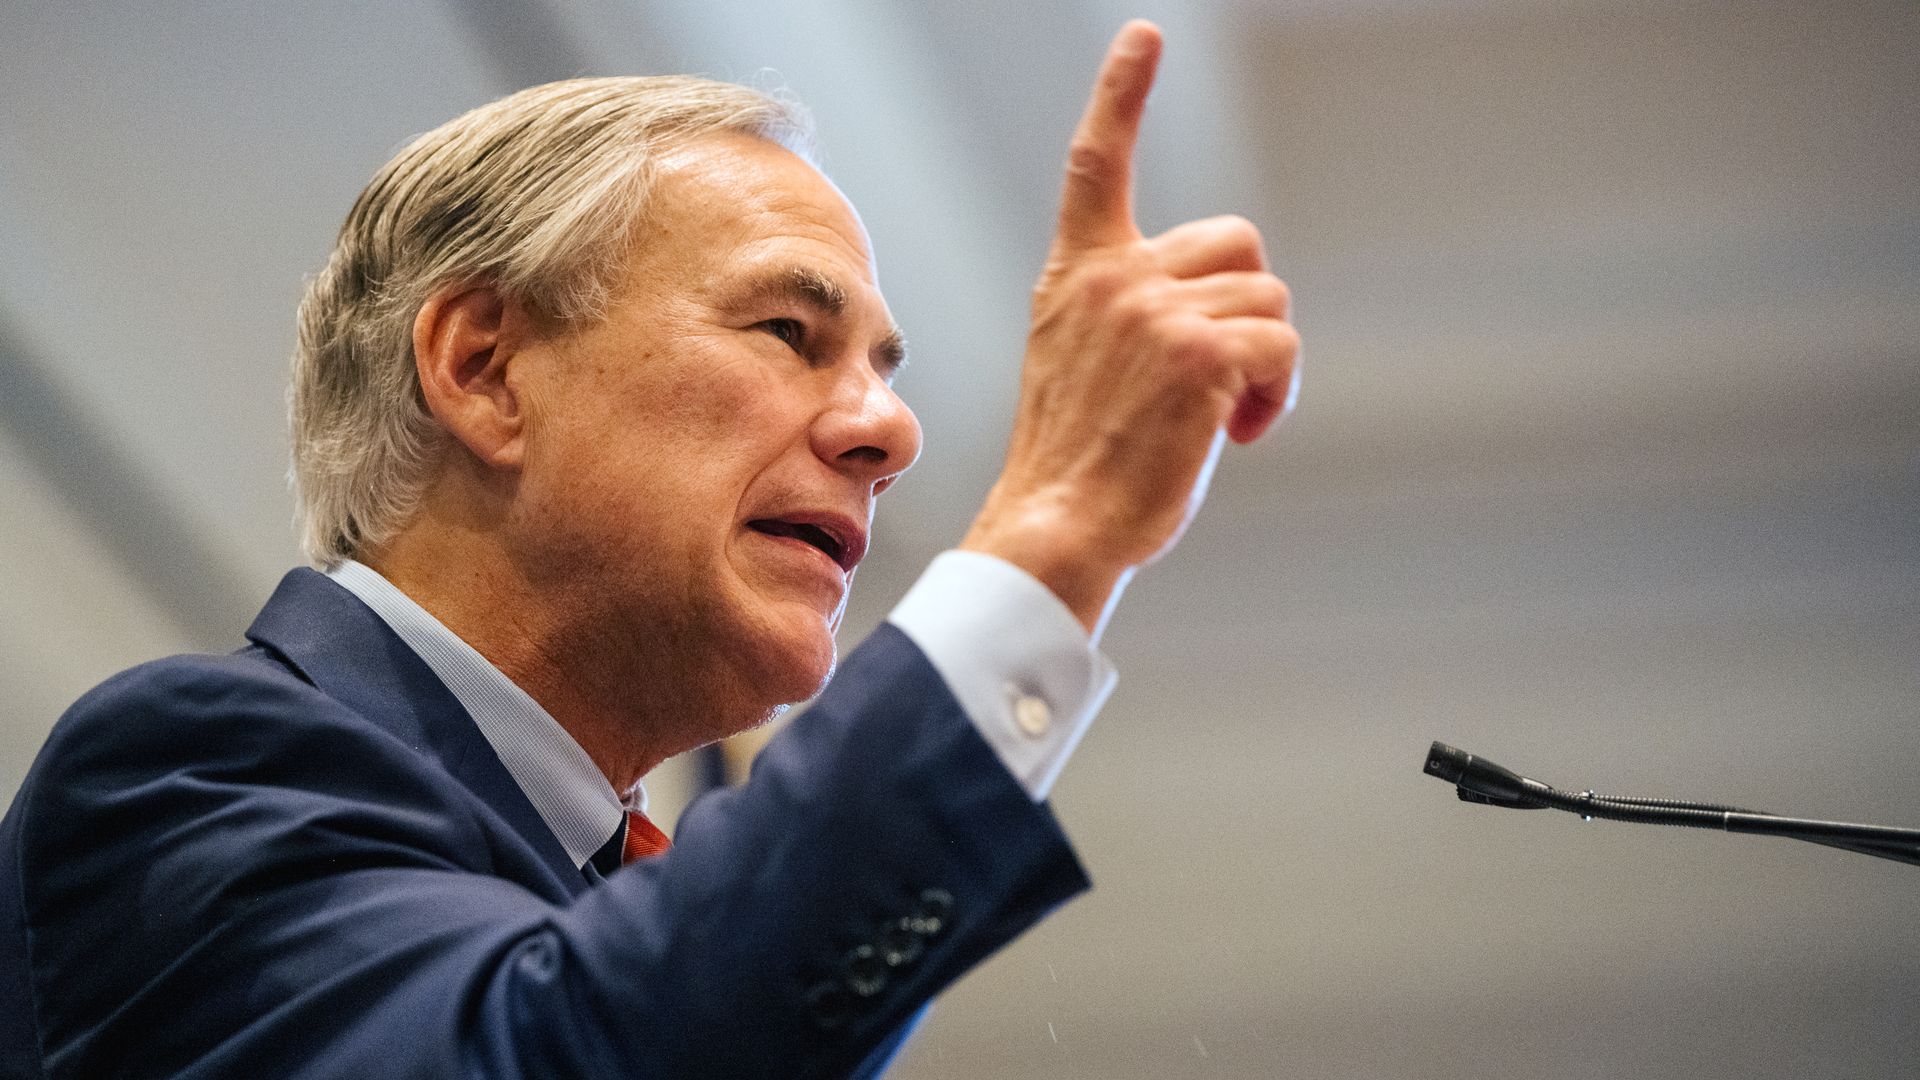 Greg Abbott with his finger in the air